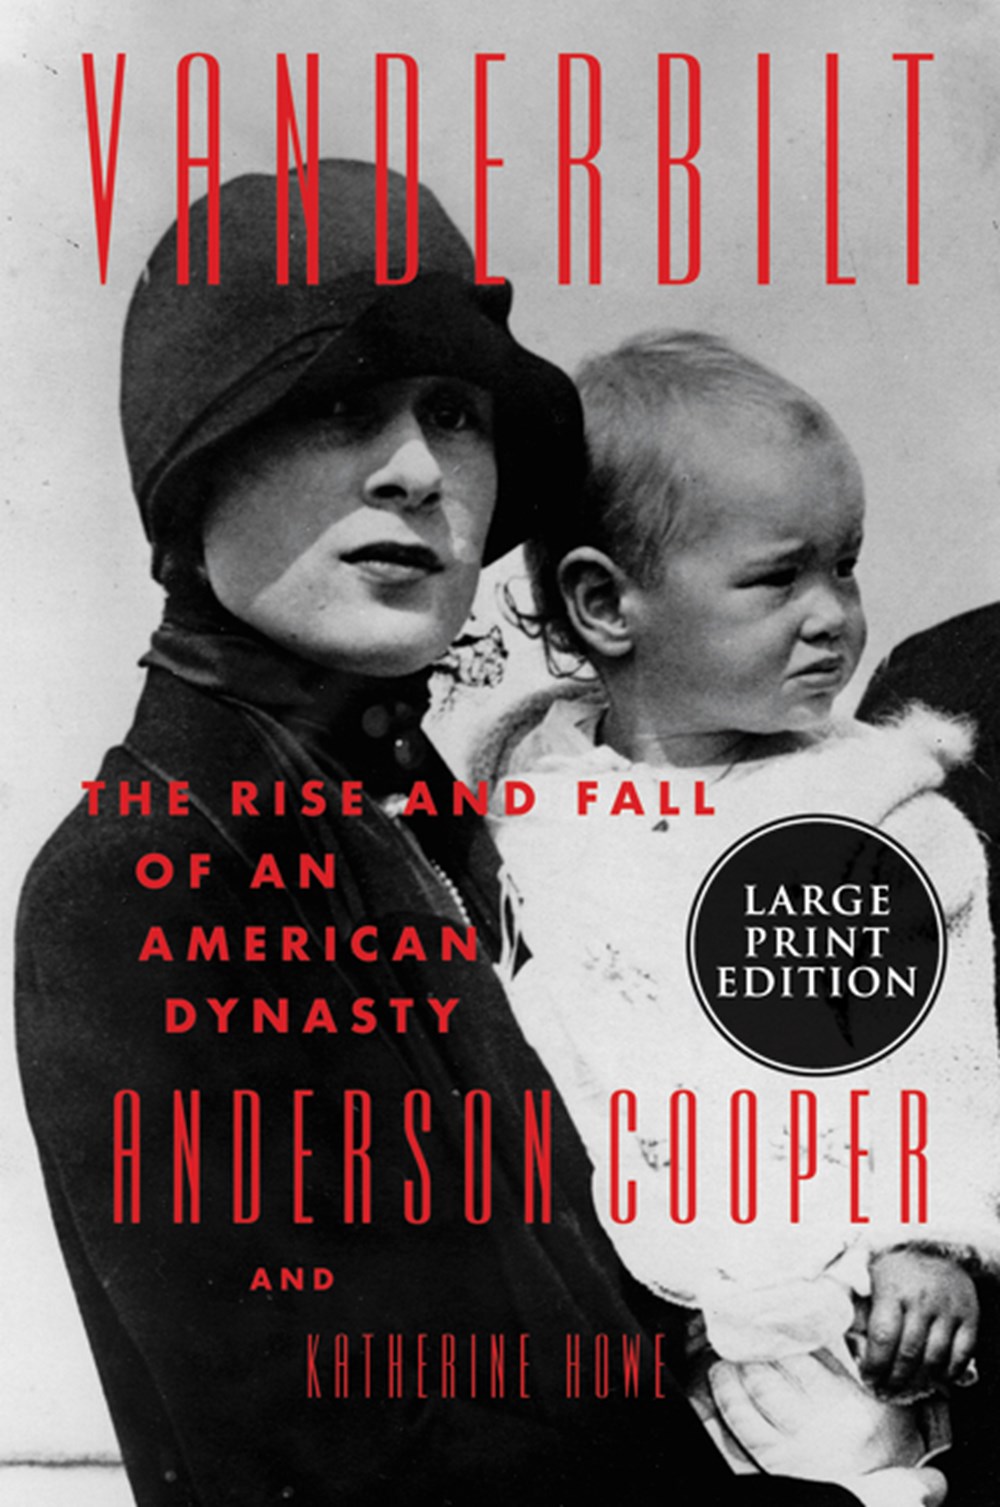 Vanderbilt The Rise and Fall of an American Dynasty